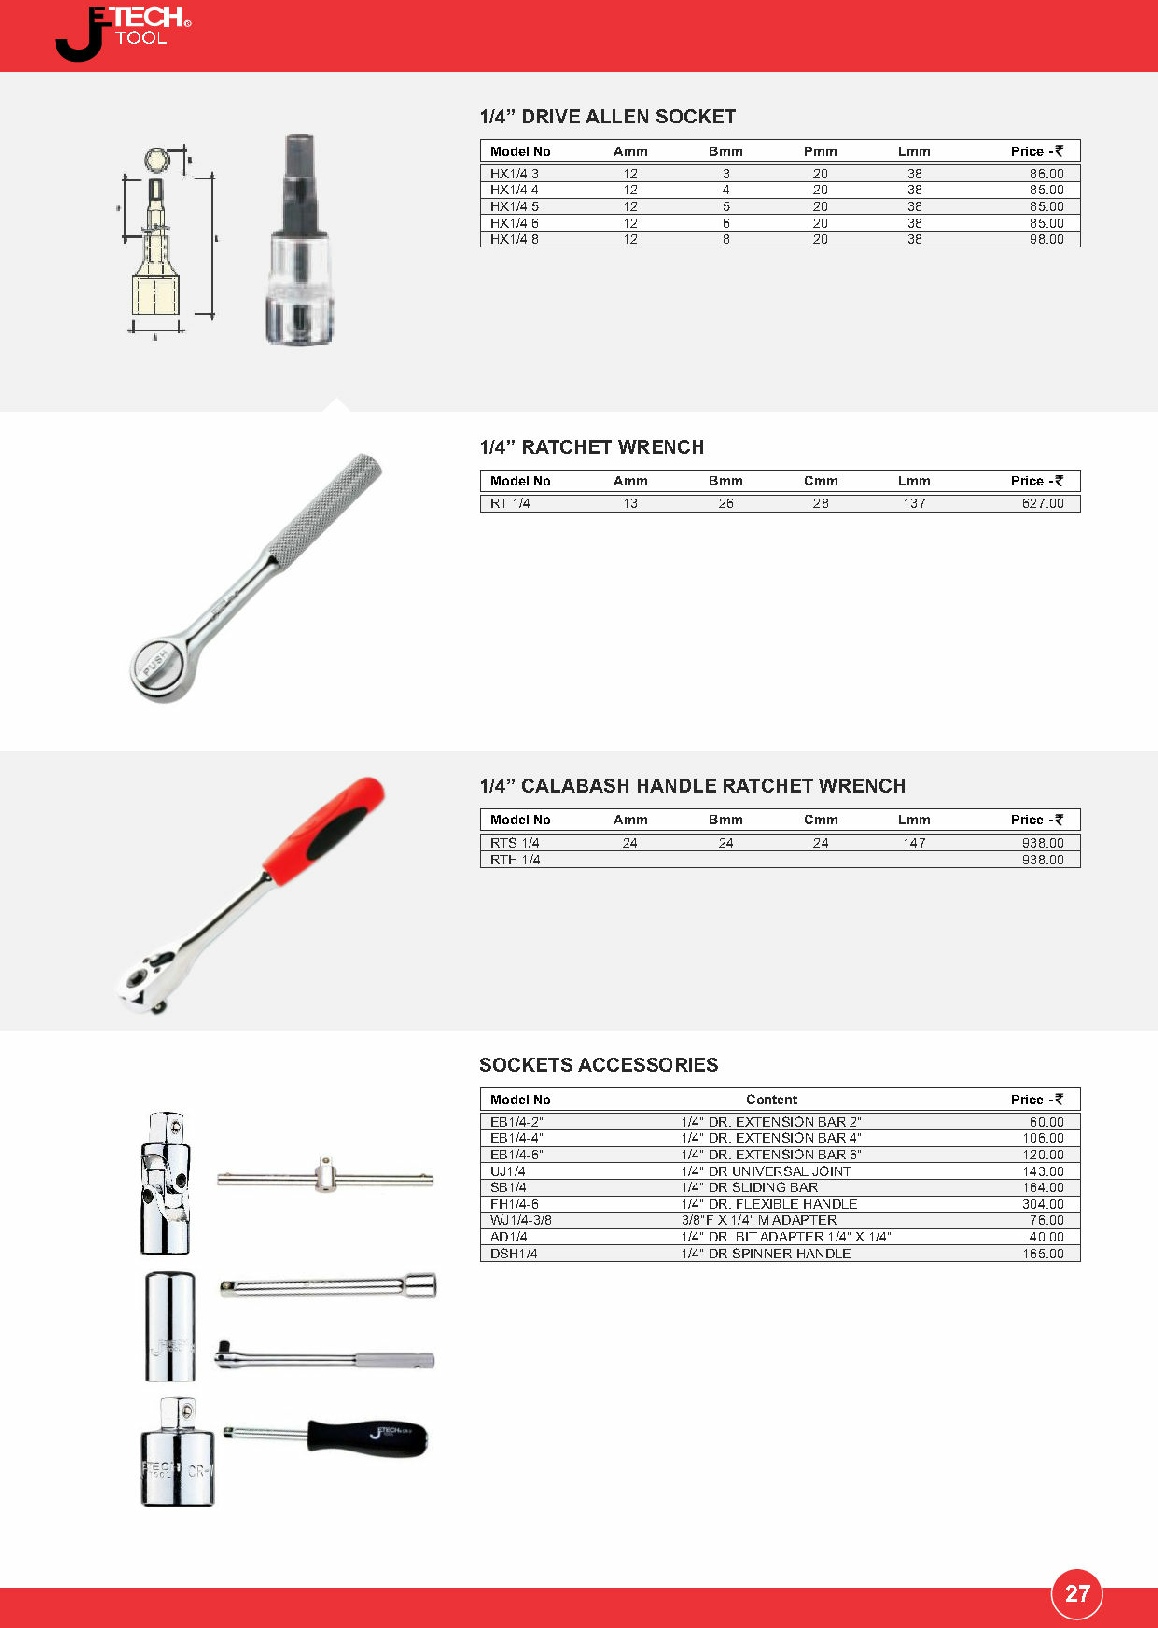 drive allenset, ratchet wrench, calabash handle ratchet wrench, socket accessories, jetech tools chennai